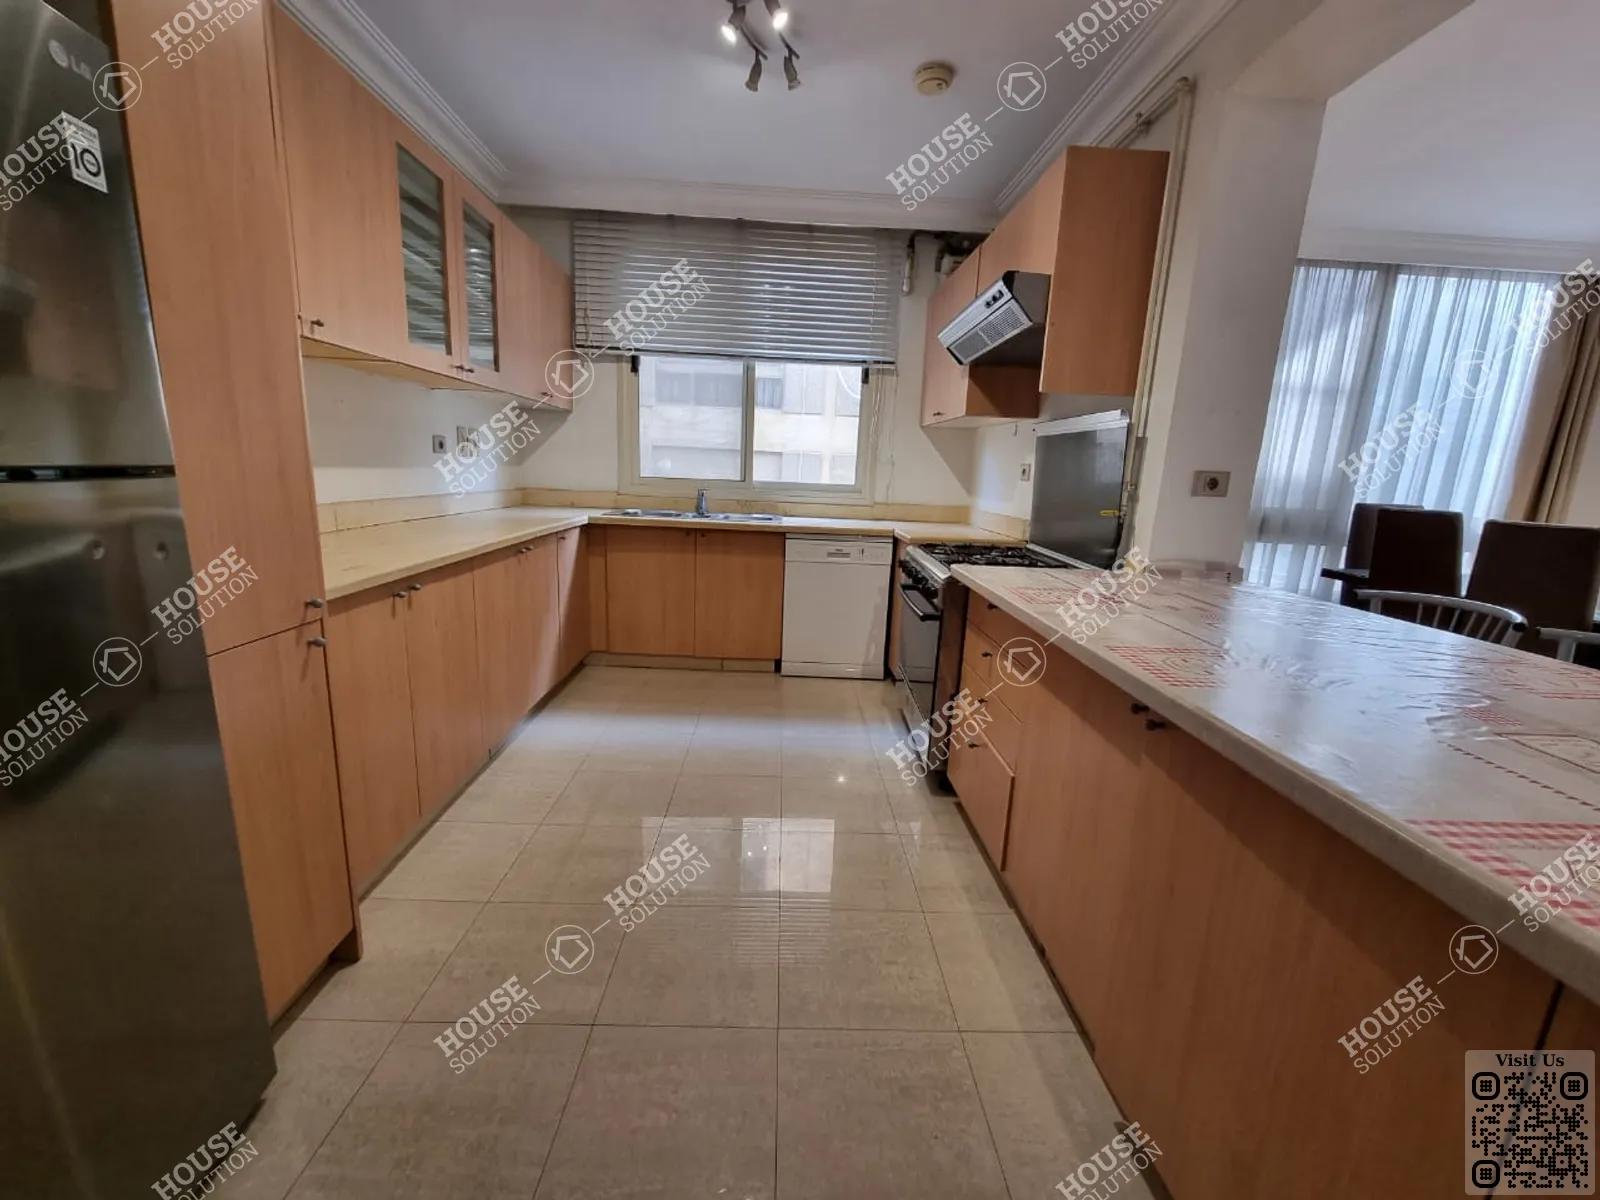 KITCHEN  @ Apartments For Rent In Maadi Maadi Sarayat Area: 288 m² consists of 4 Bedrooms 4 Bathrooms Modern furnished 5 stars #5420-2